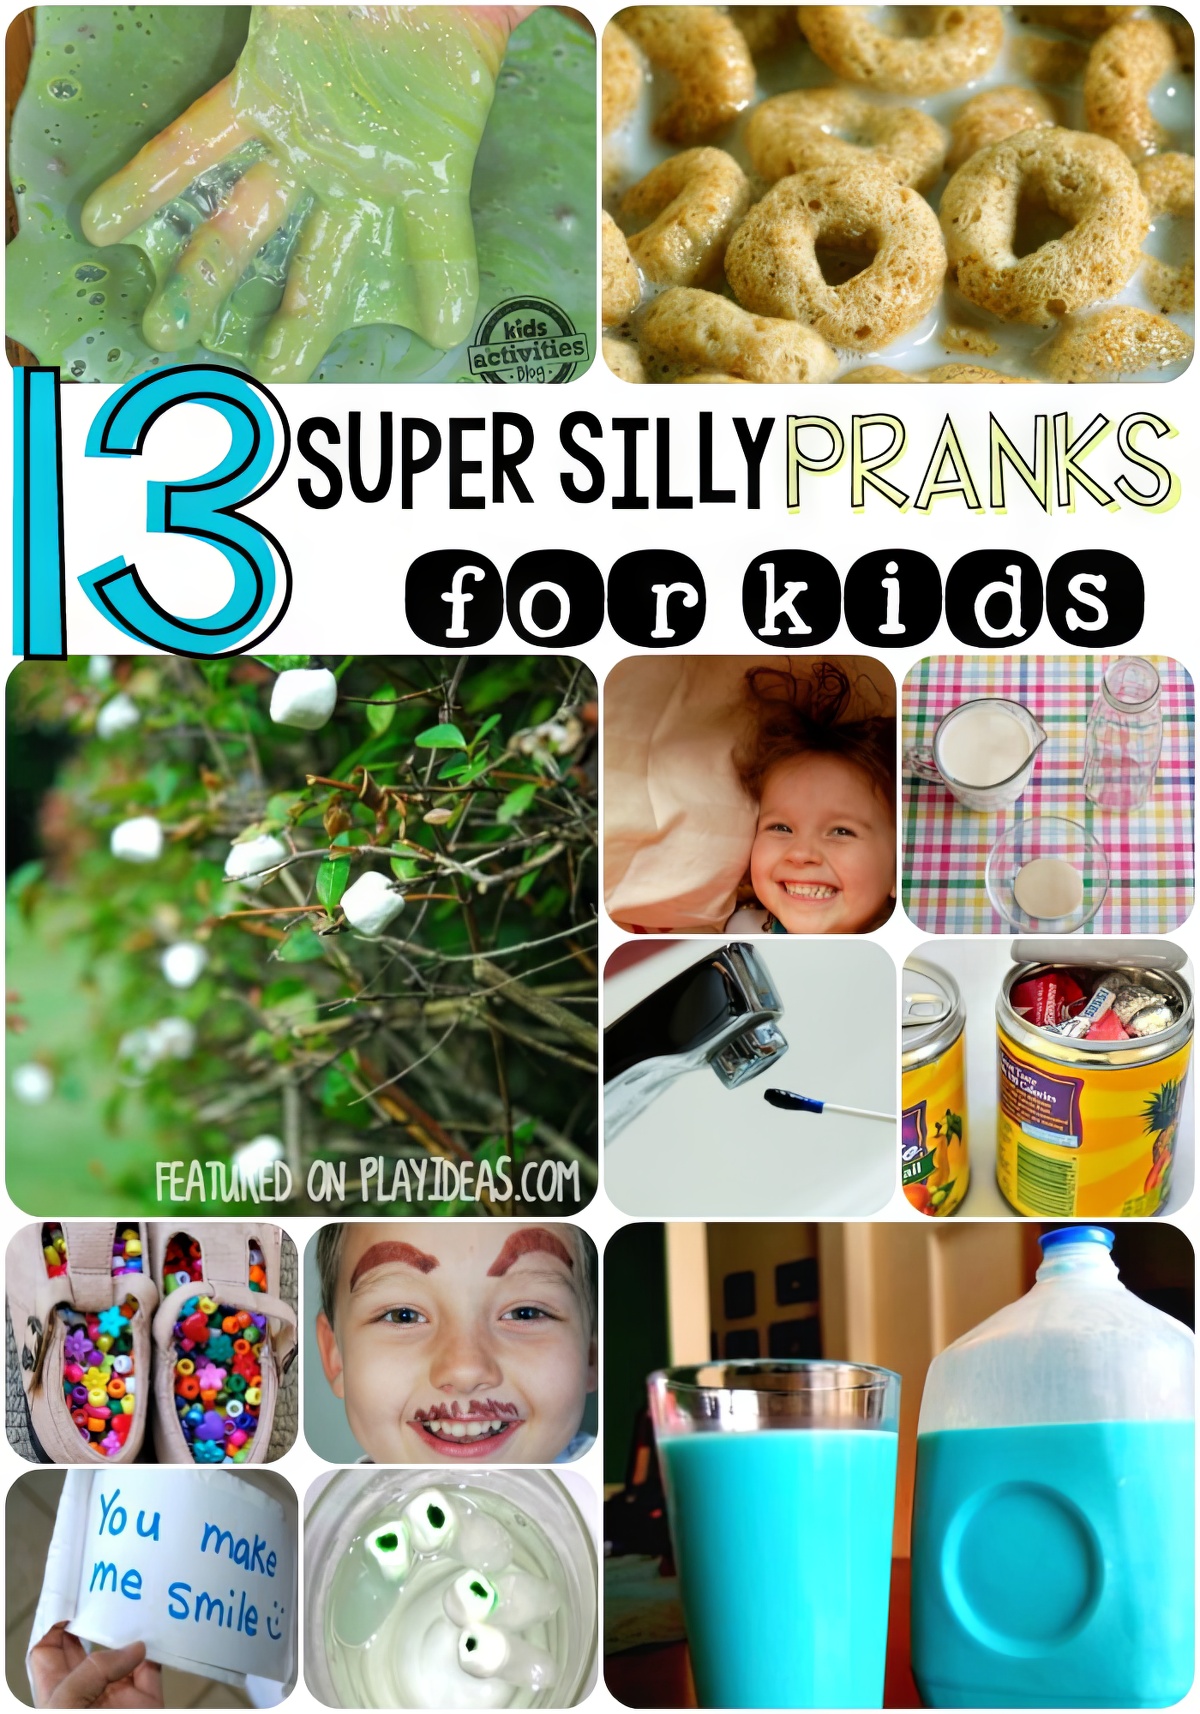 13 SUPER SILLY PRANKS FOR KIDS you can enjoy this April Fools!